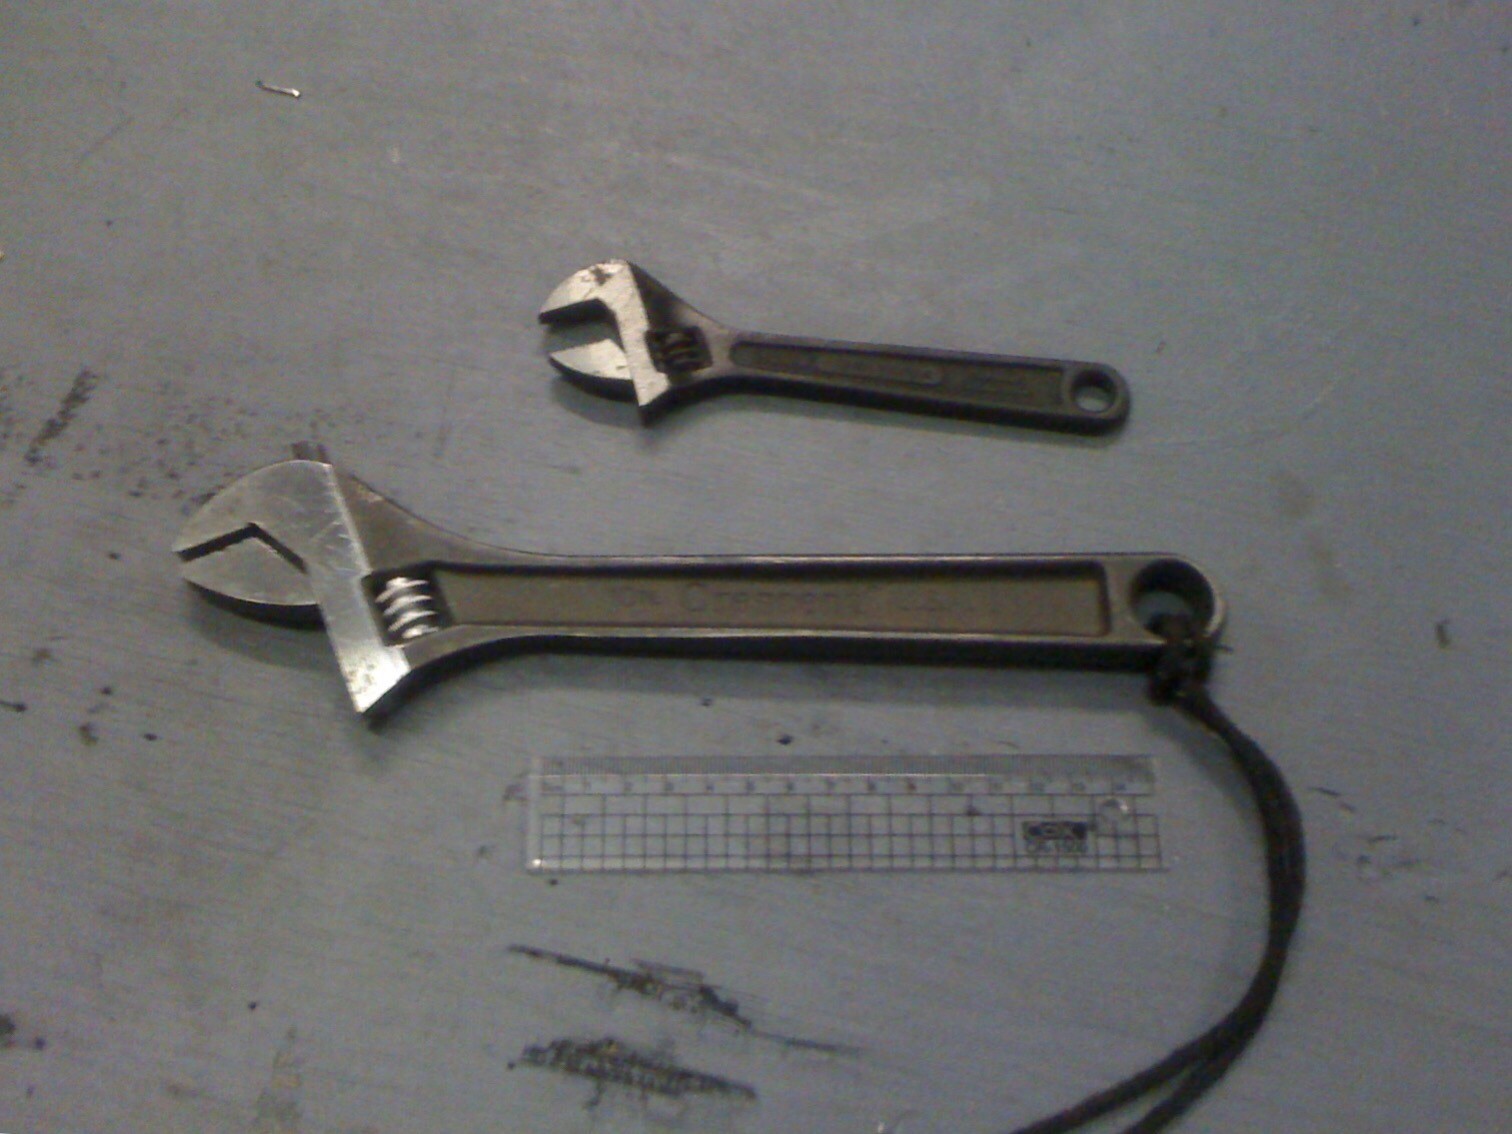 A six inch wrench above an eight inch wrench.